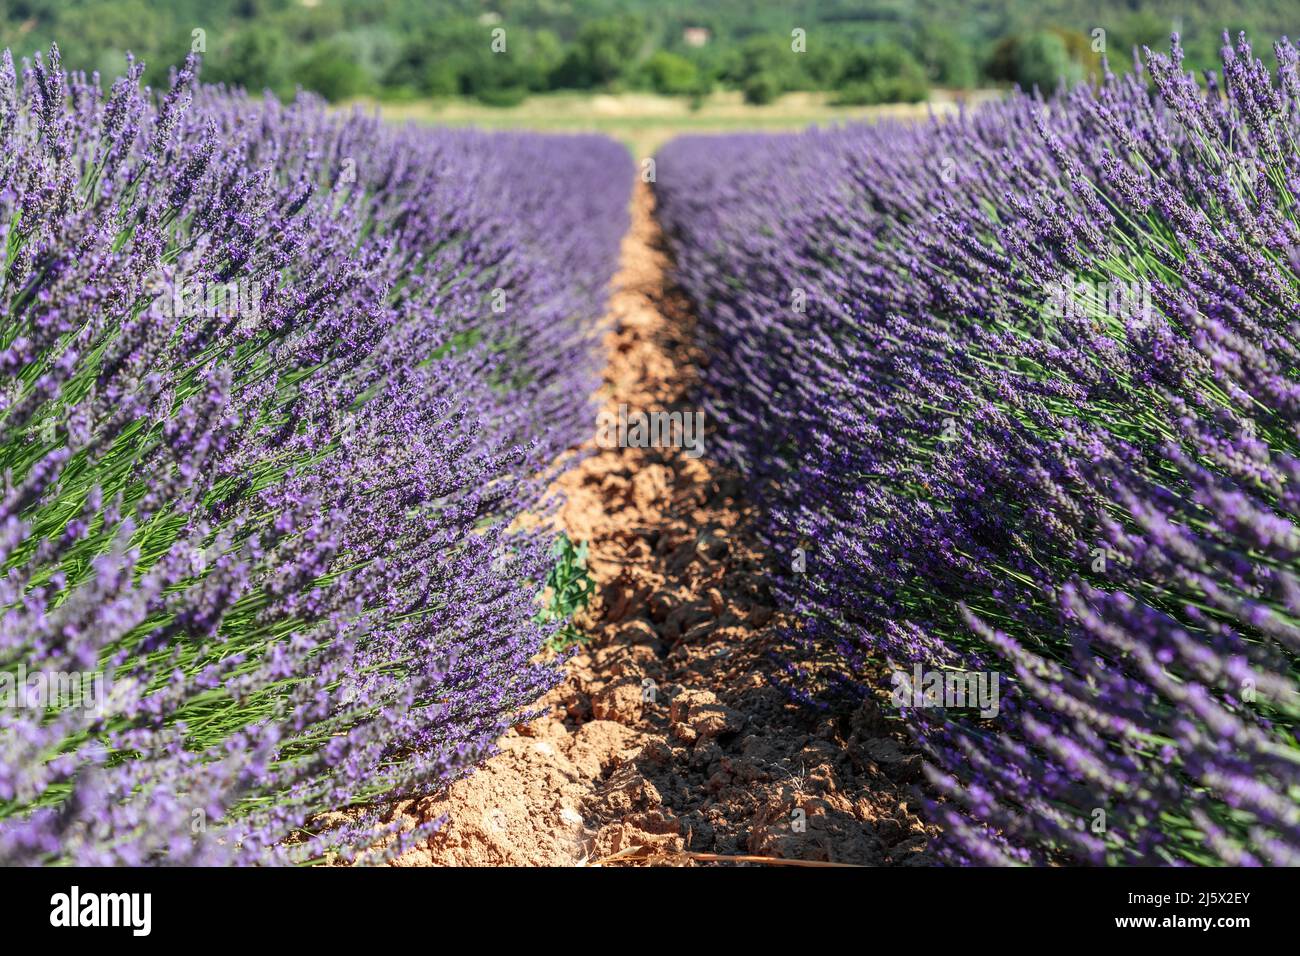 Lush thickets of young Provencal lavender of delicate lilac color, young juicy green stems on gravel ground. Vaucluse, Provence, France Stock Photo